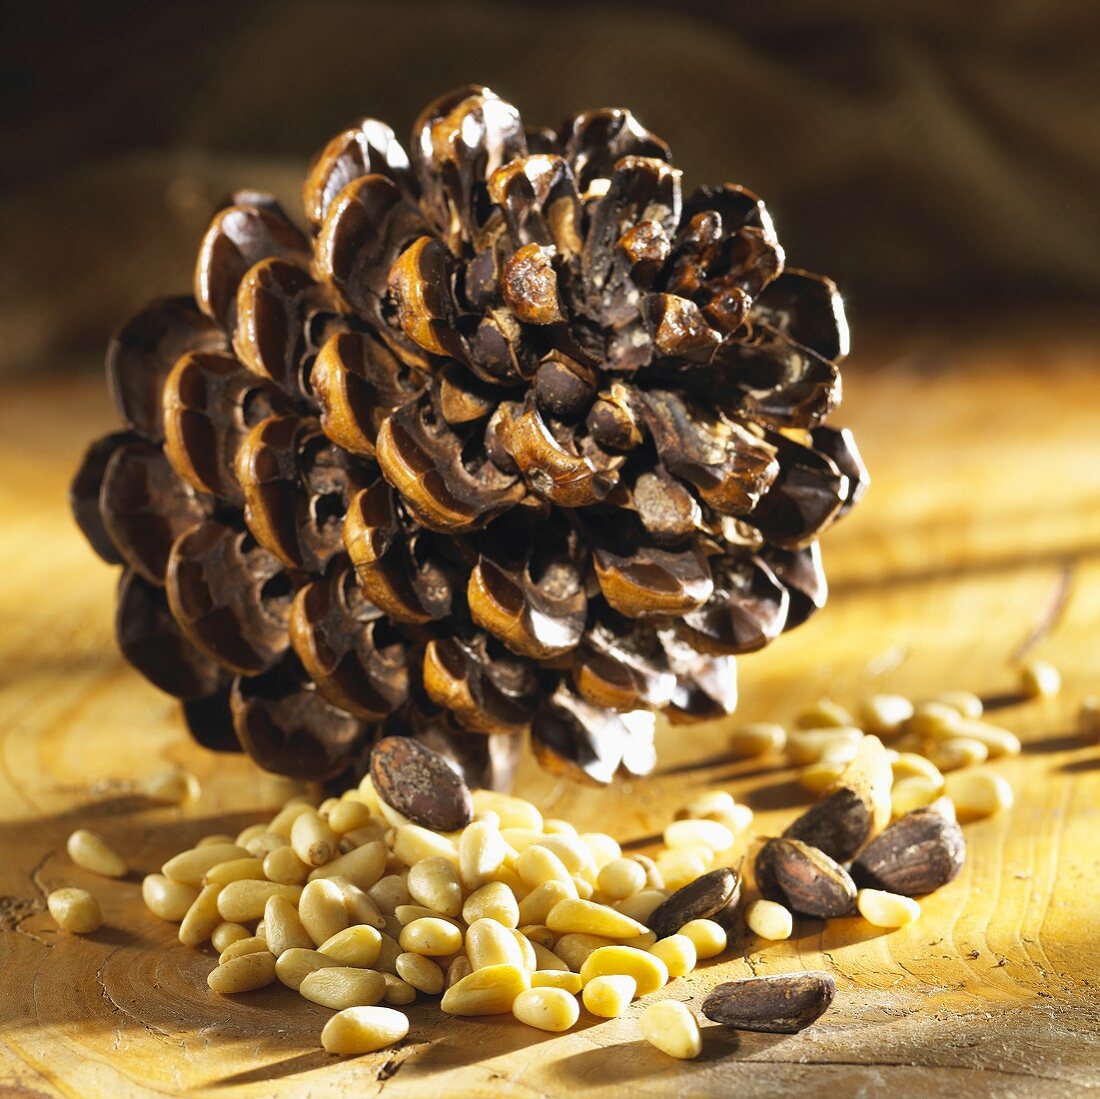 Pine cone and pine nuts